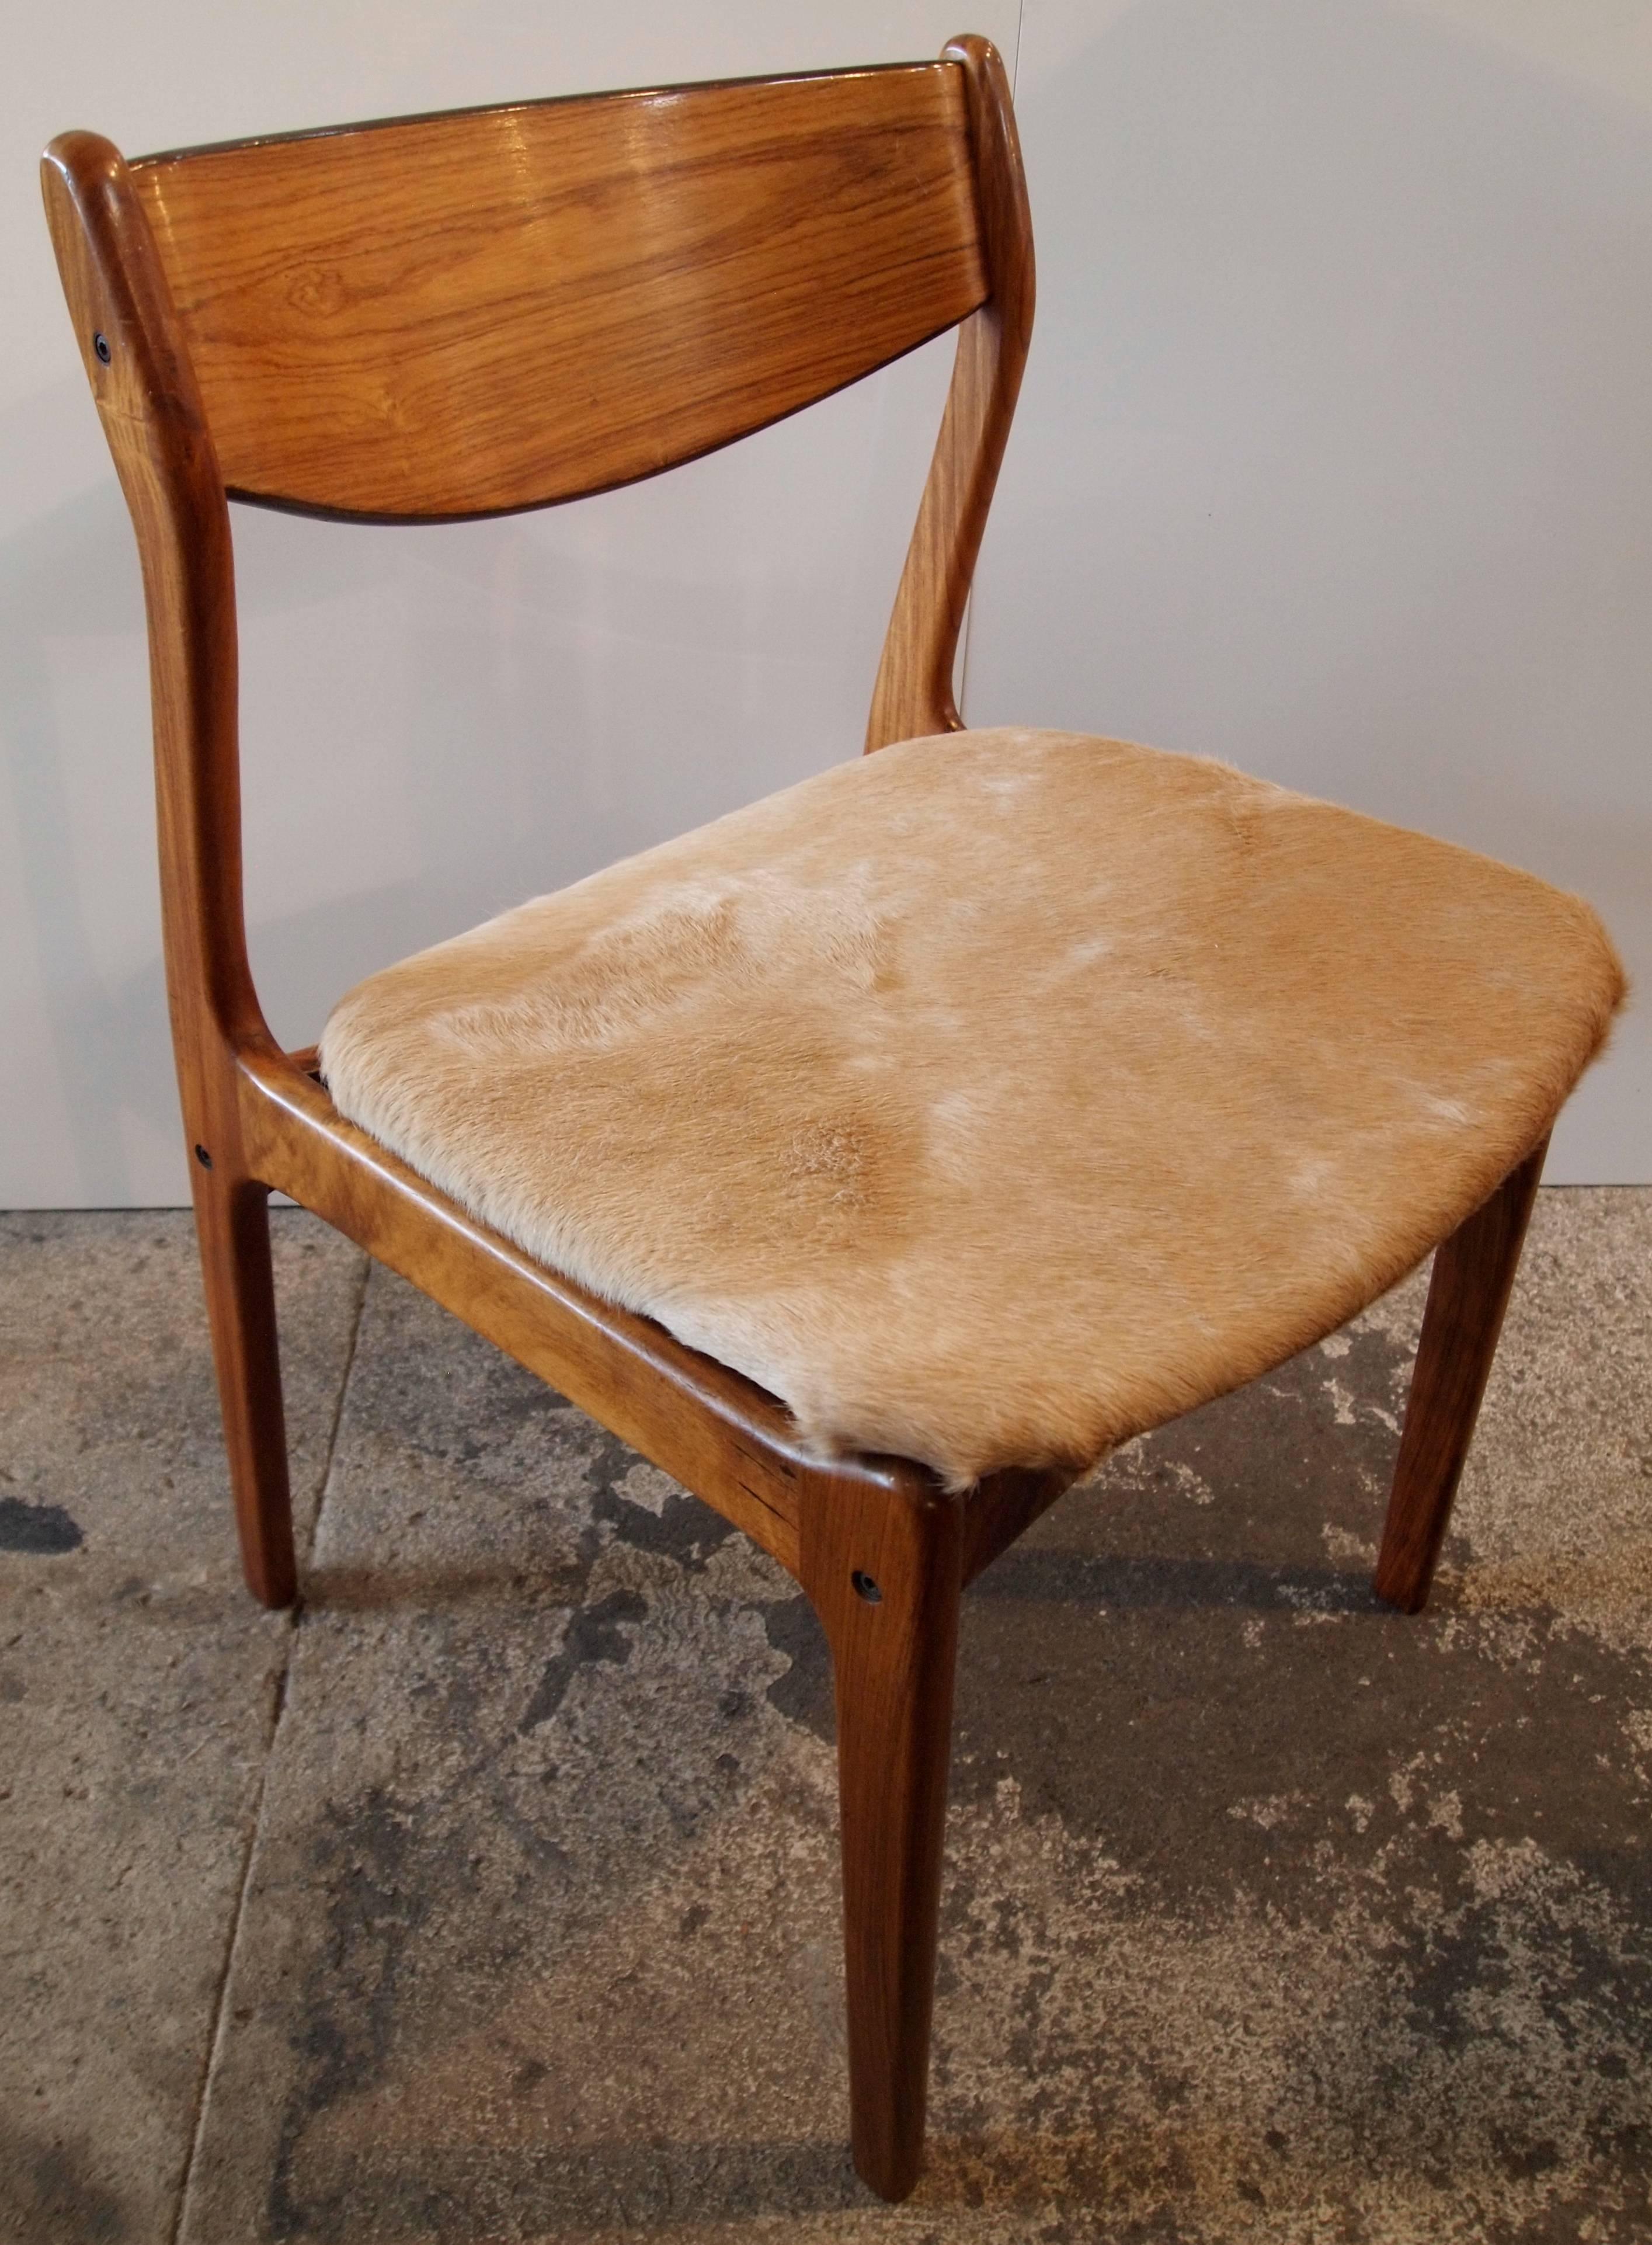 Danish Mid-Century/modern side chair made of Brazilian rosewood with upholstered seat.